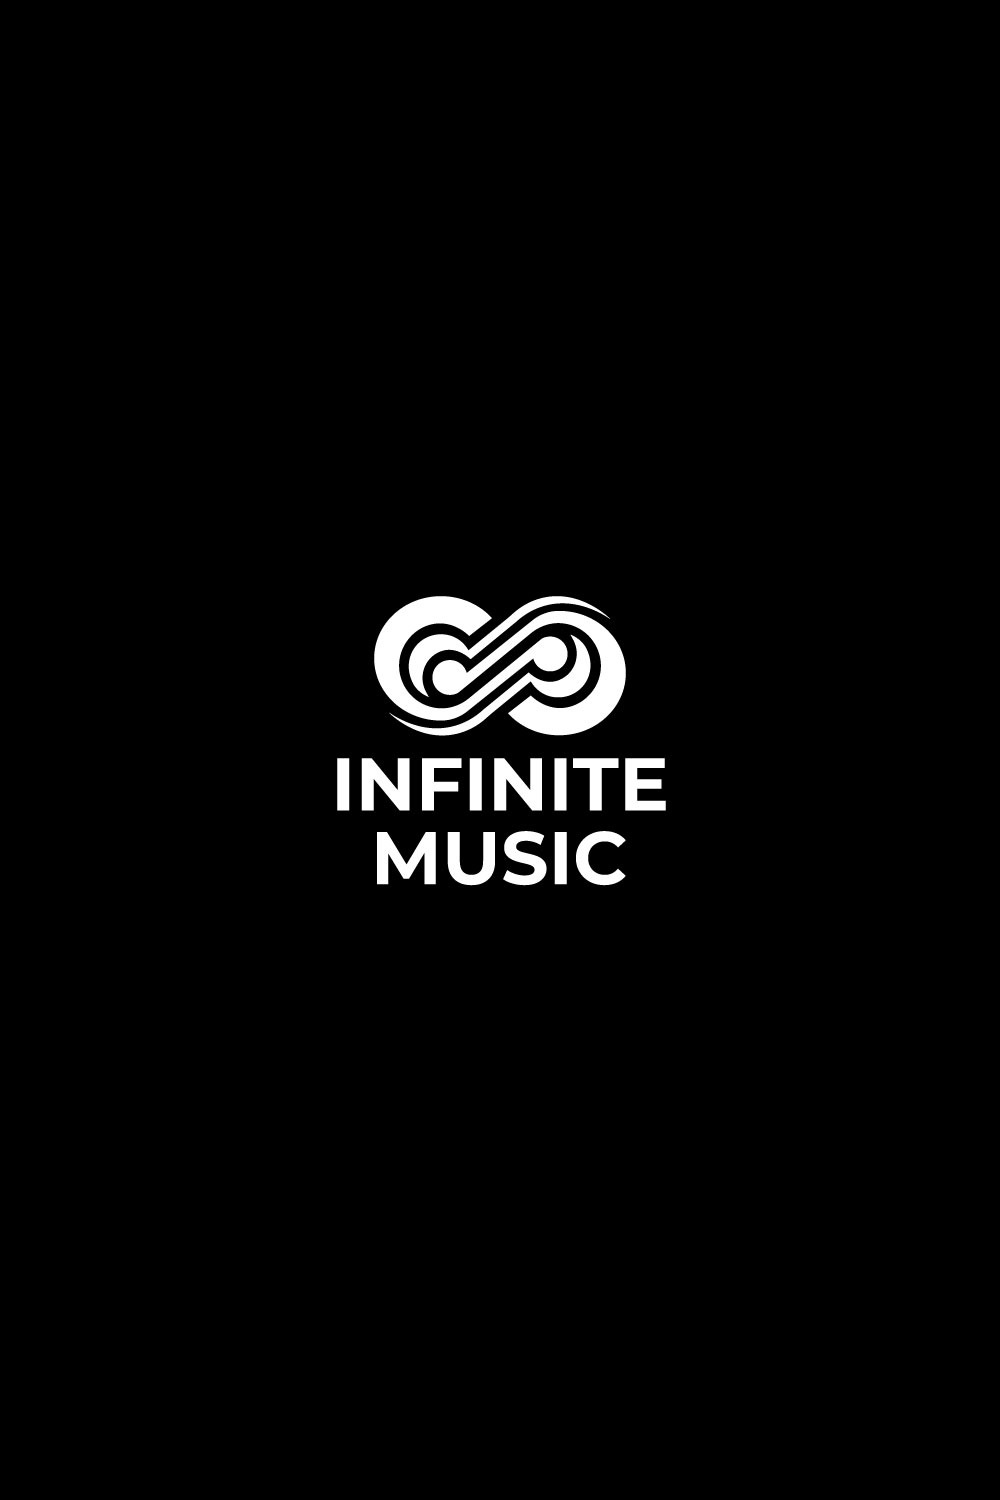 infinity musical logo design template pinterest preview image.